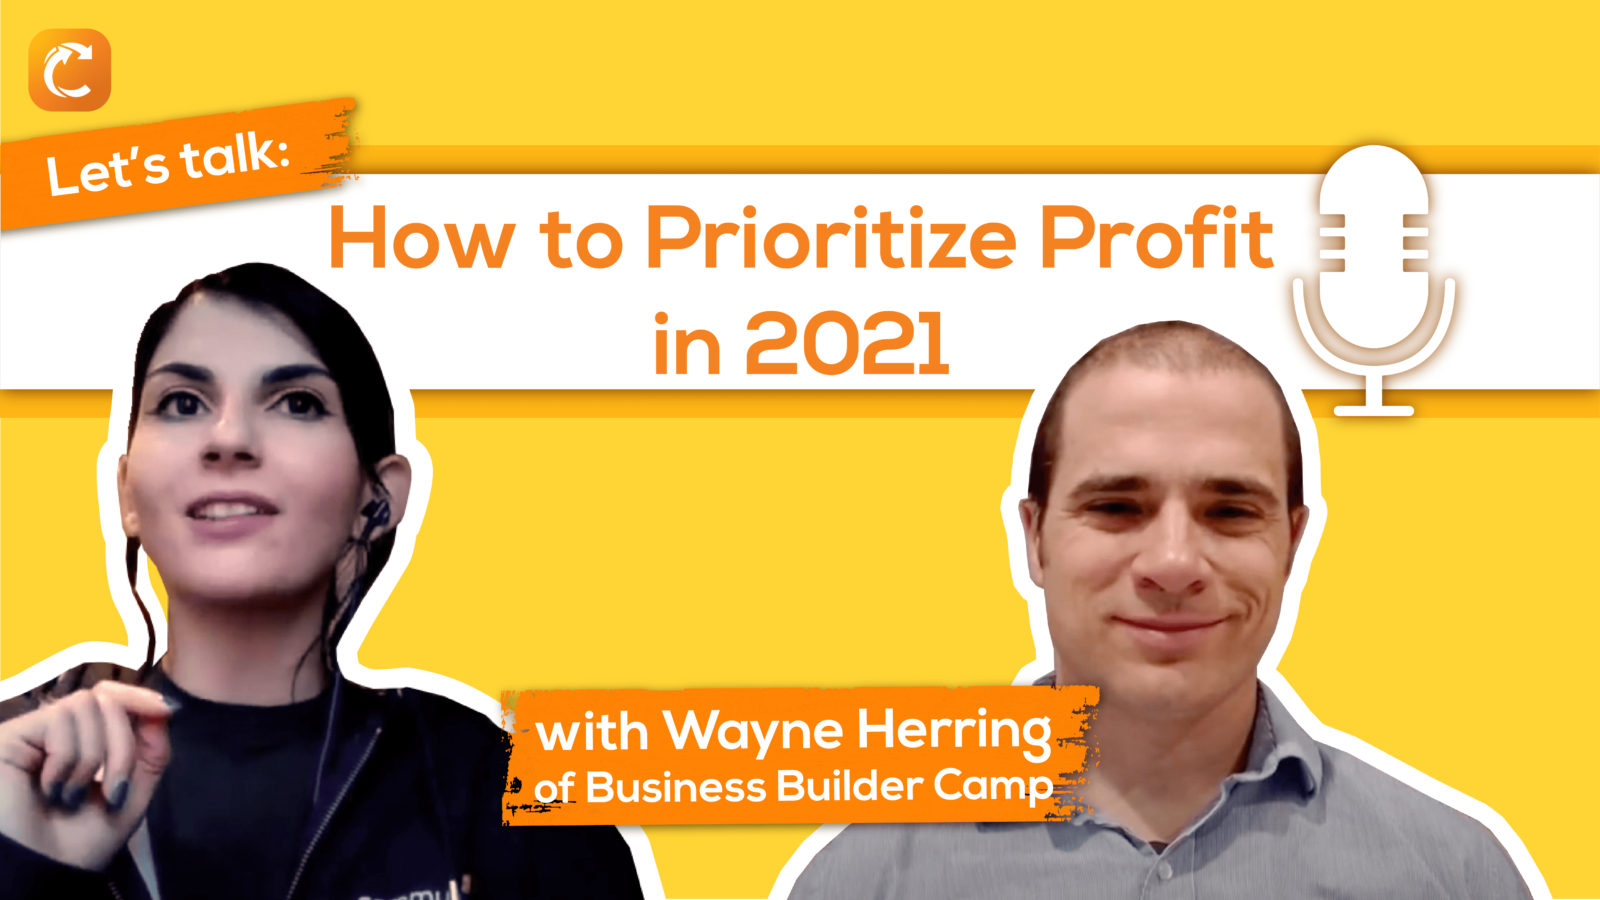 Let’s Talk: How to Prioritize Profit in 2021 w/ Wayne Herring of Business Builder Camp